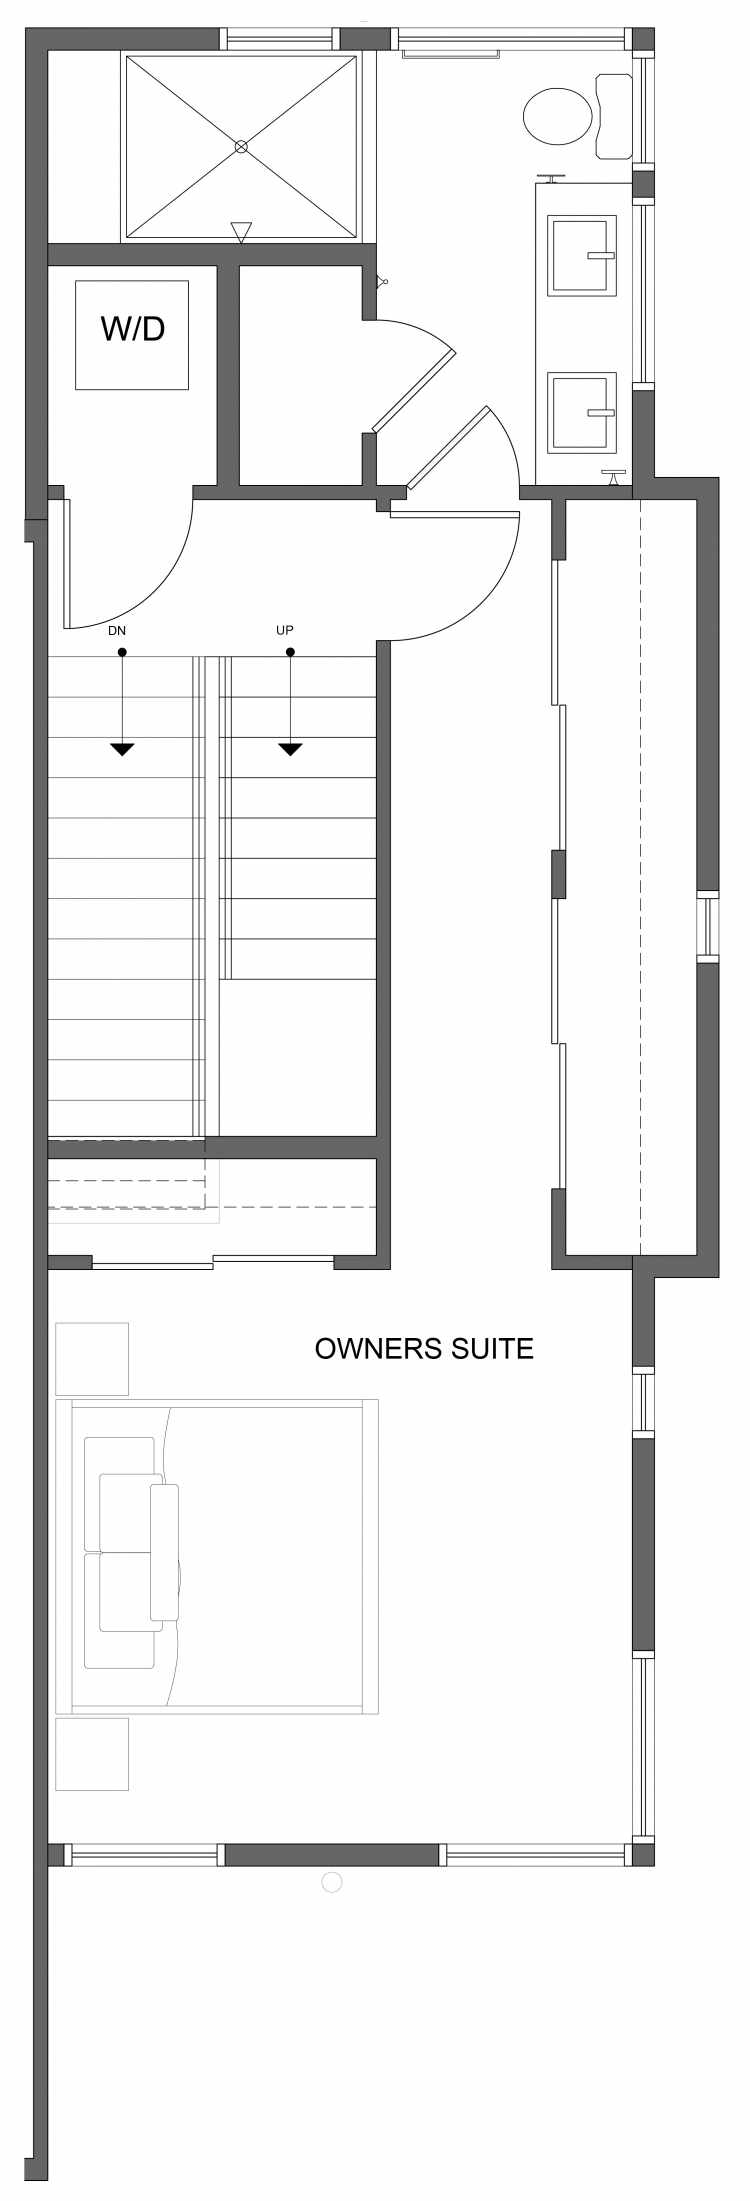 Third Floor Plan of 1030C NE 70th St, One of the Sopris on 70th Townhomes in Roosevelt